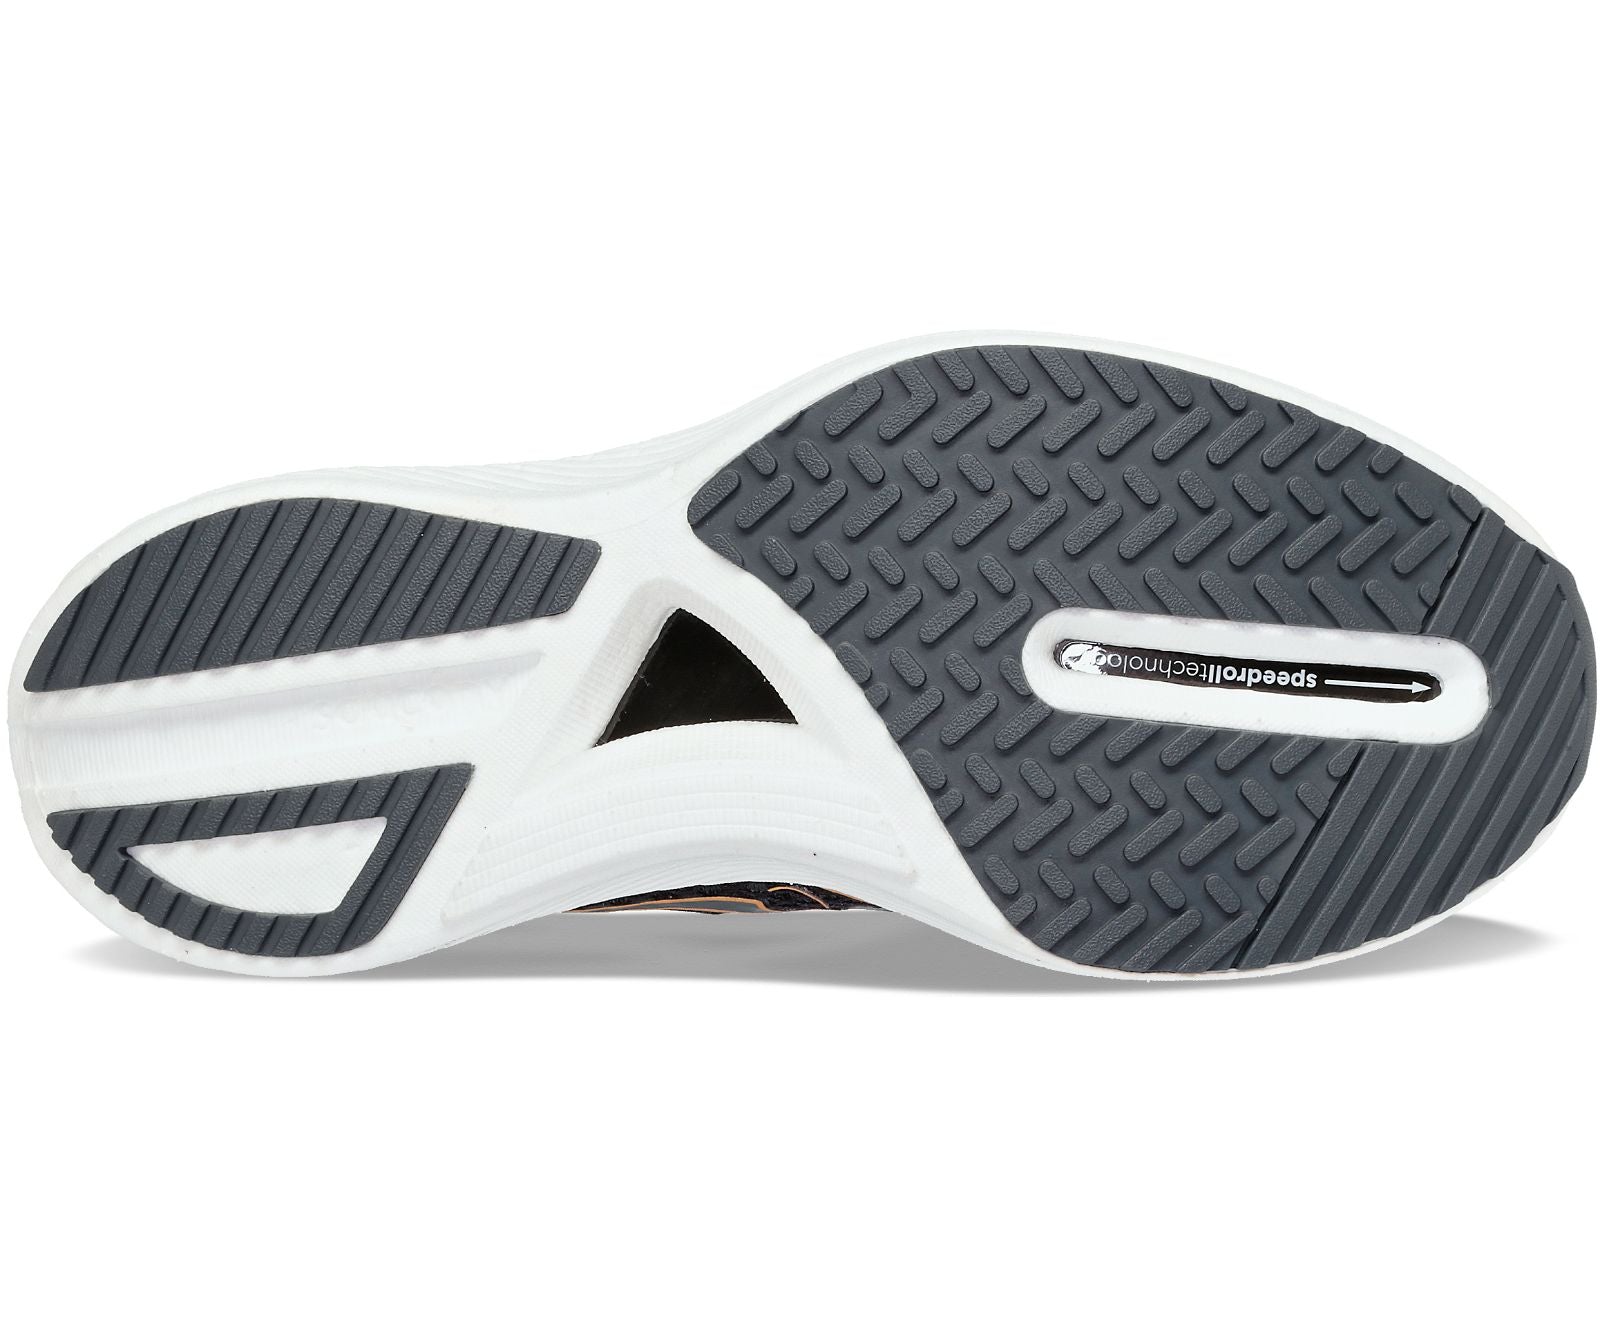 Bottom (outer sole) view of the Men's Endorphin Pro 3 by Saucony in the color Black/Goldstruck